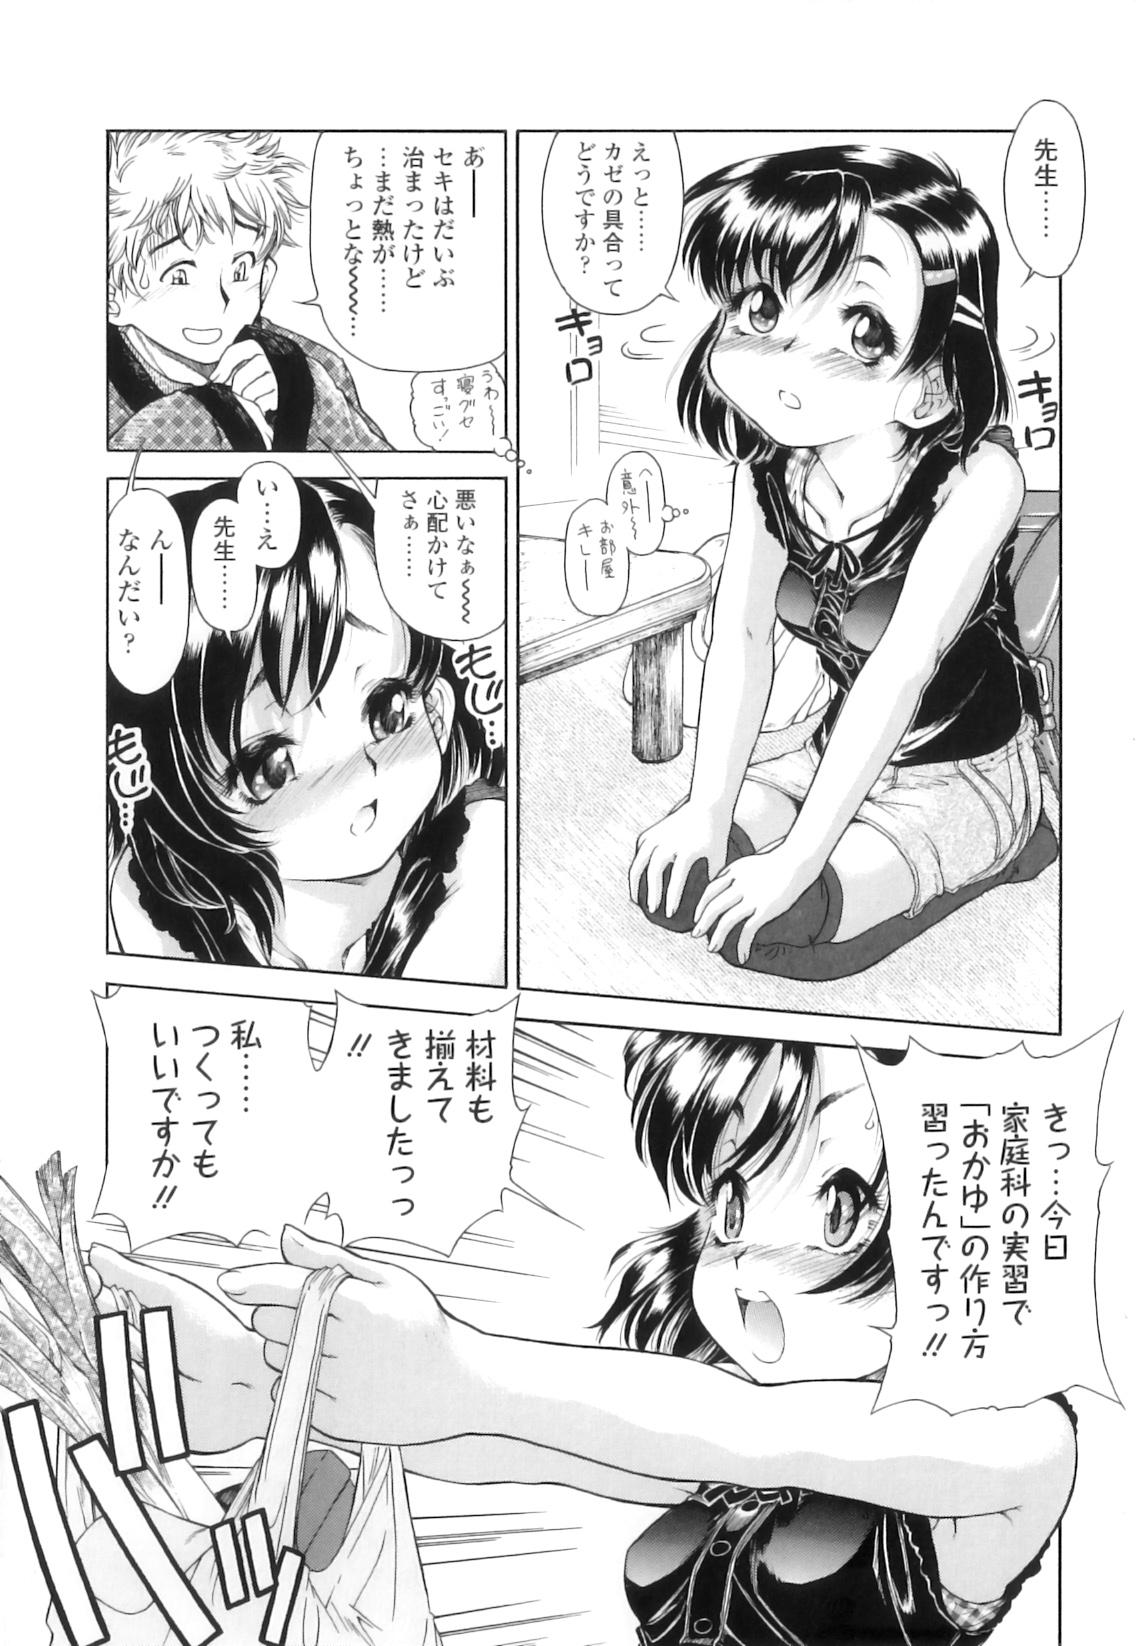 Fingering Houkago Tsuushinbo!! - After School Report!! Toy - Page 11